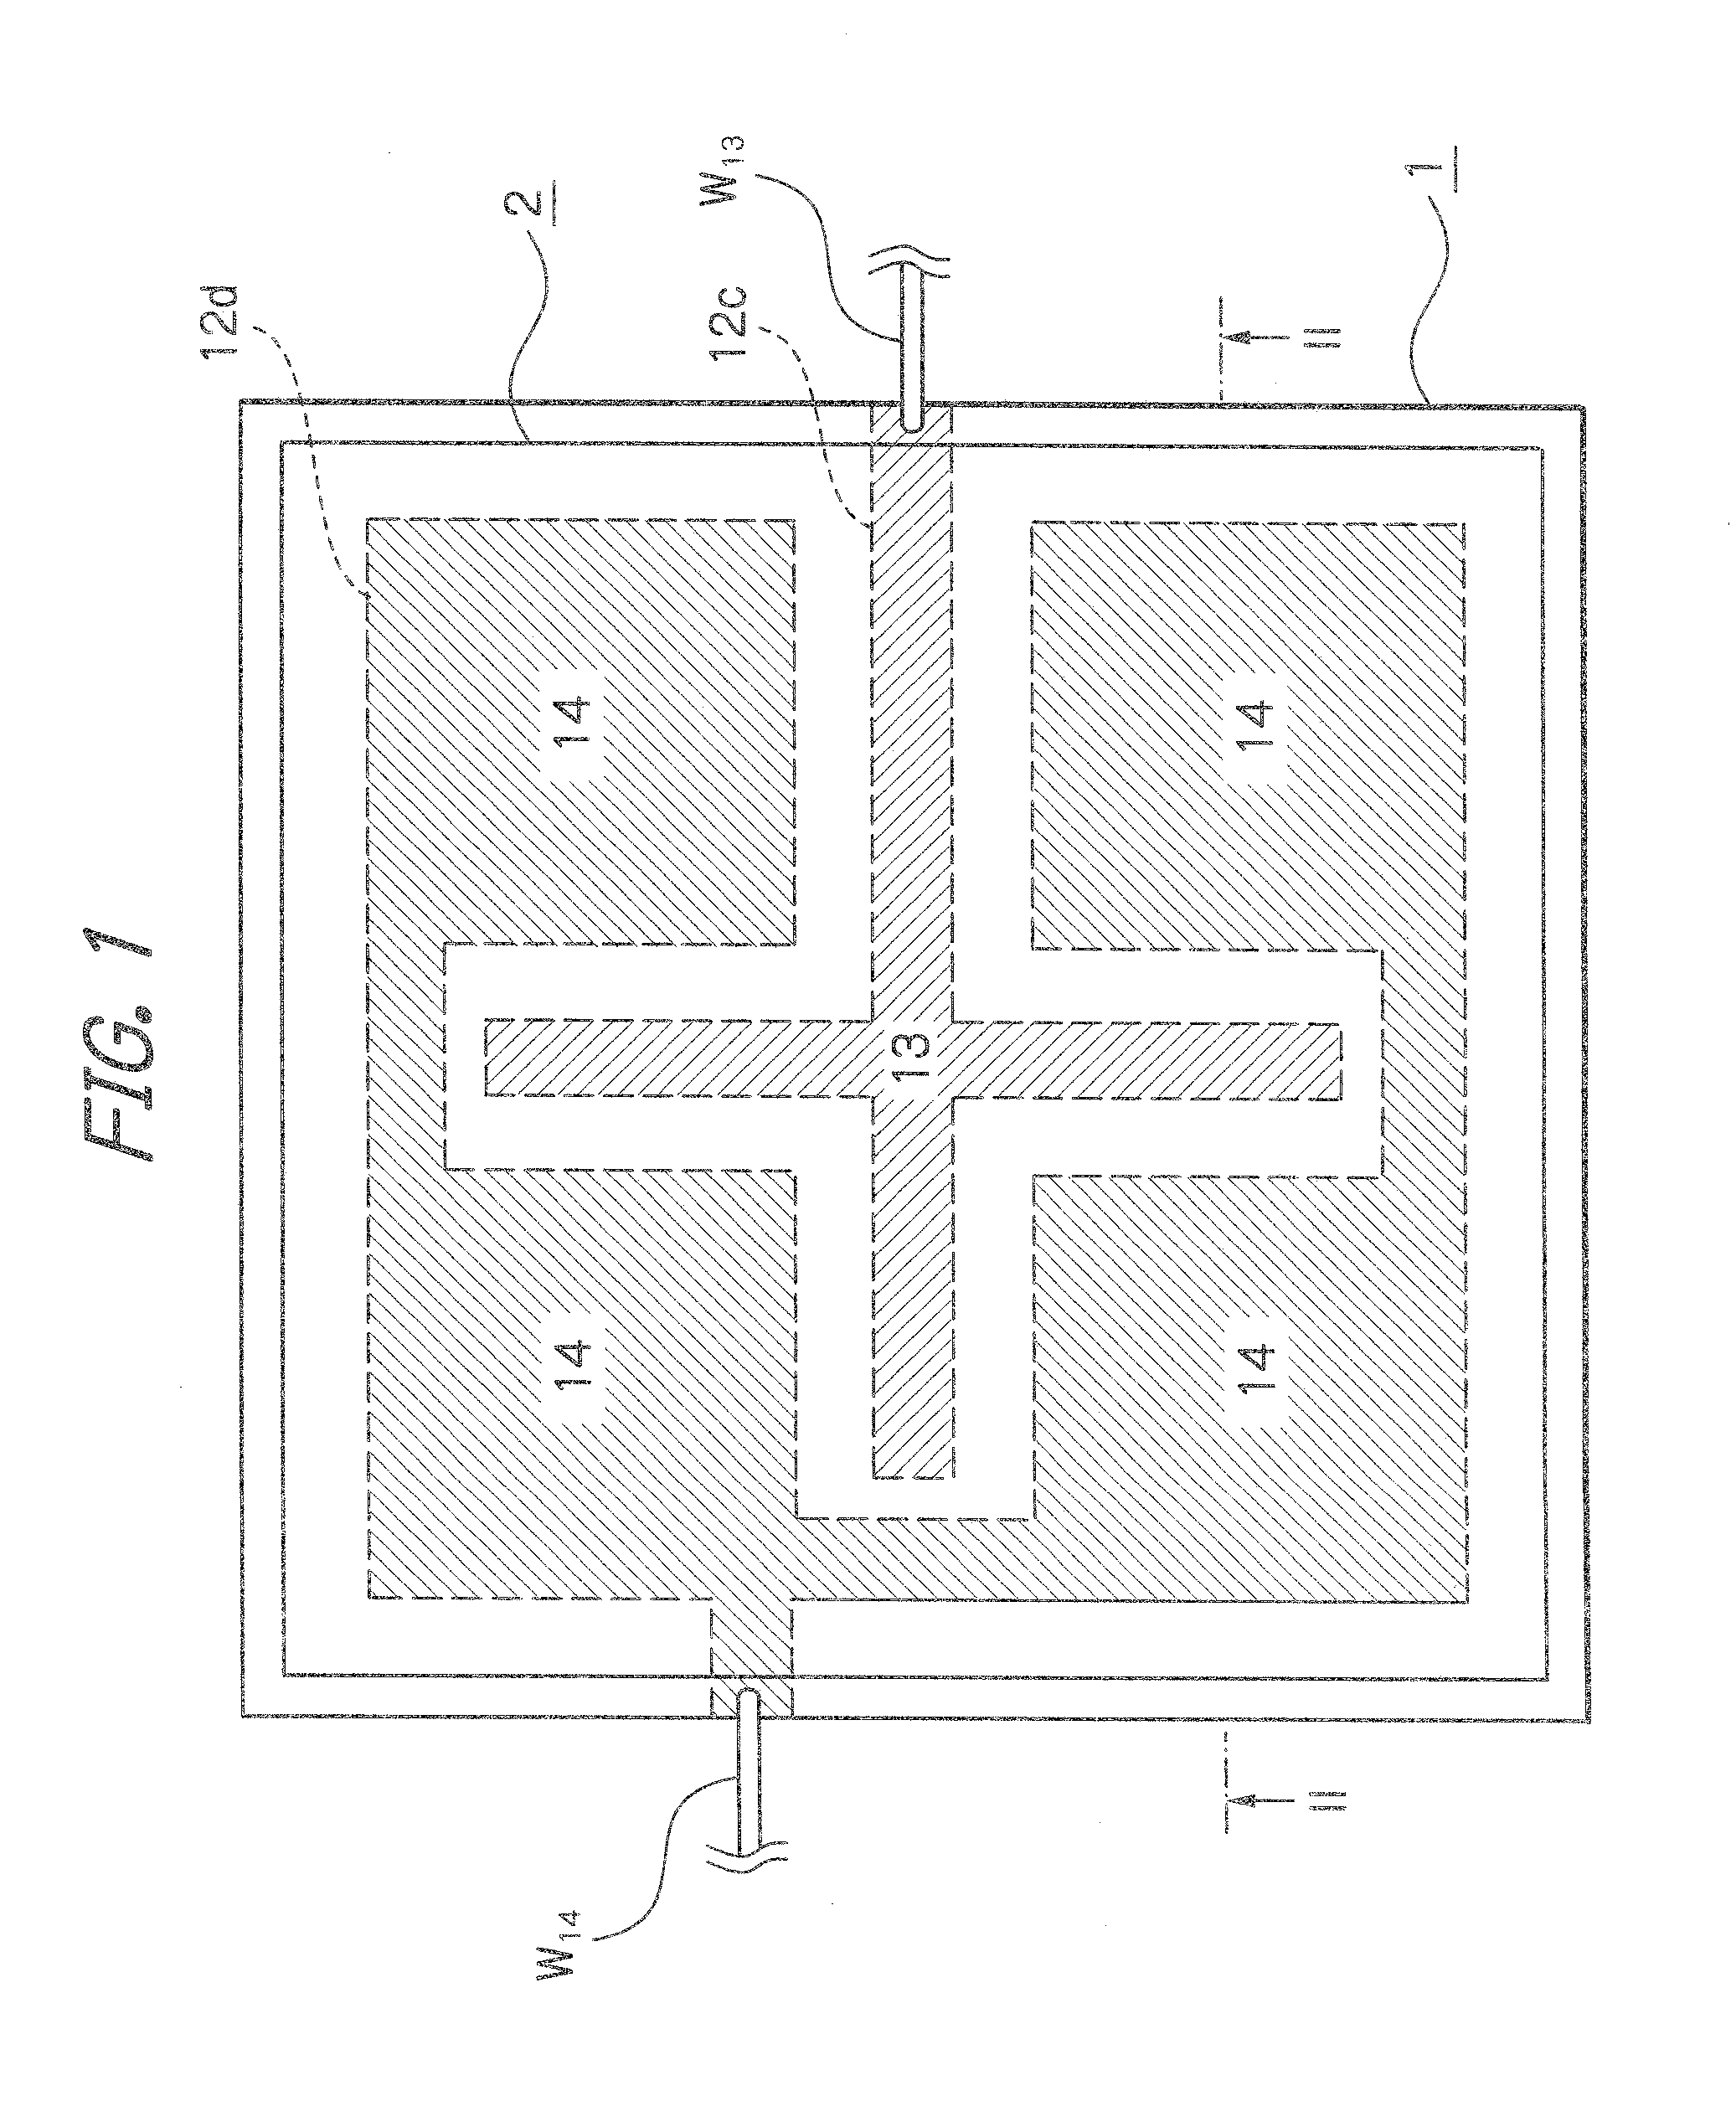 SEMICONDUCTOR DEVICE INCLUDING h-BN INSULATING LAYER AND ITS MANUFACTURING METHOD